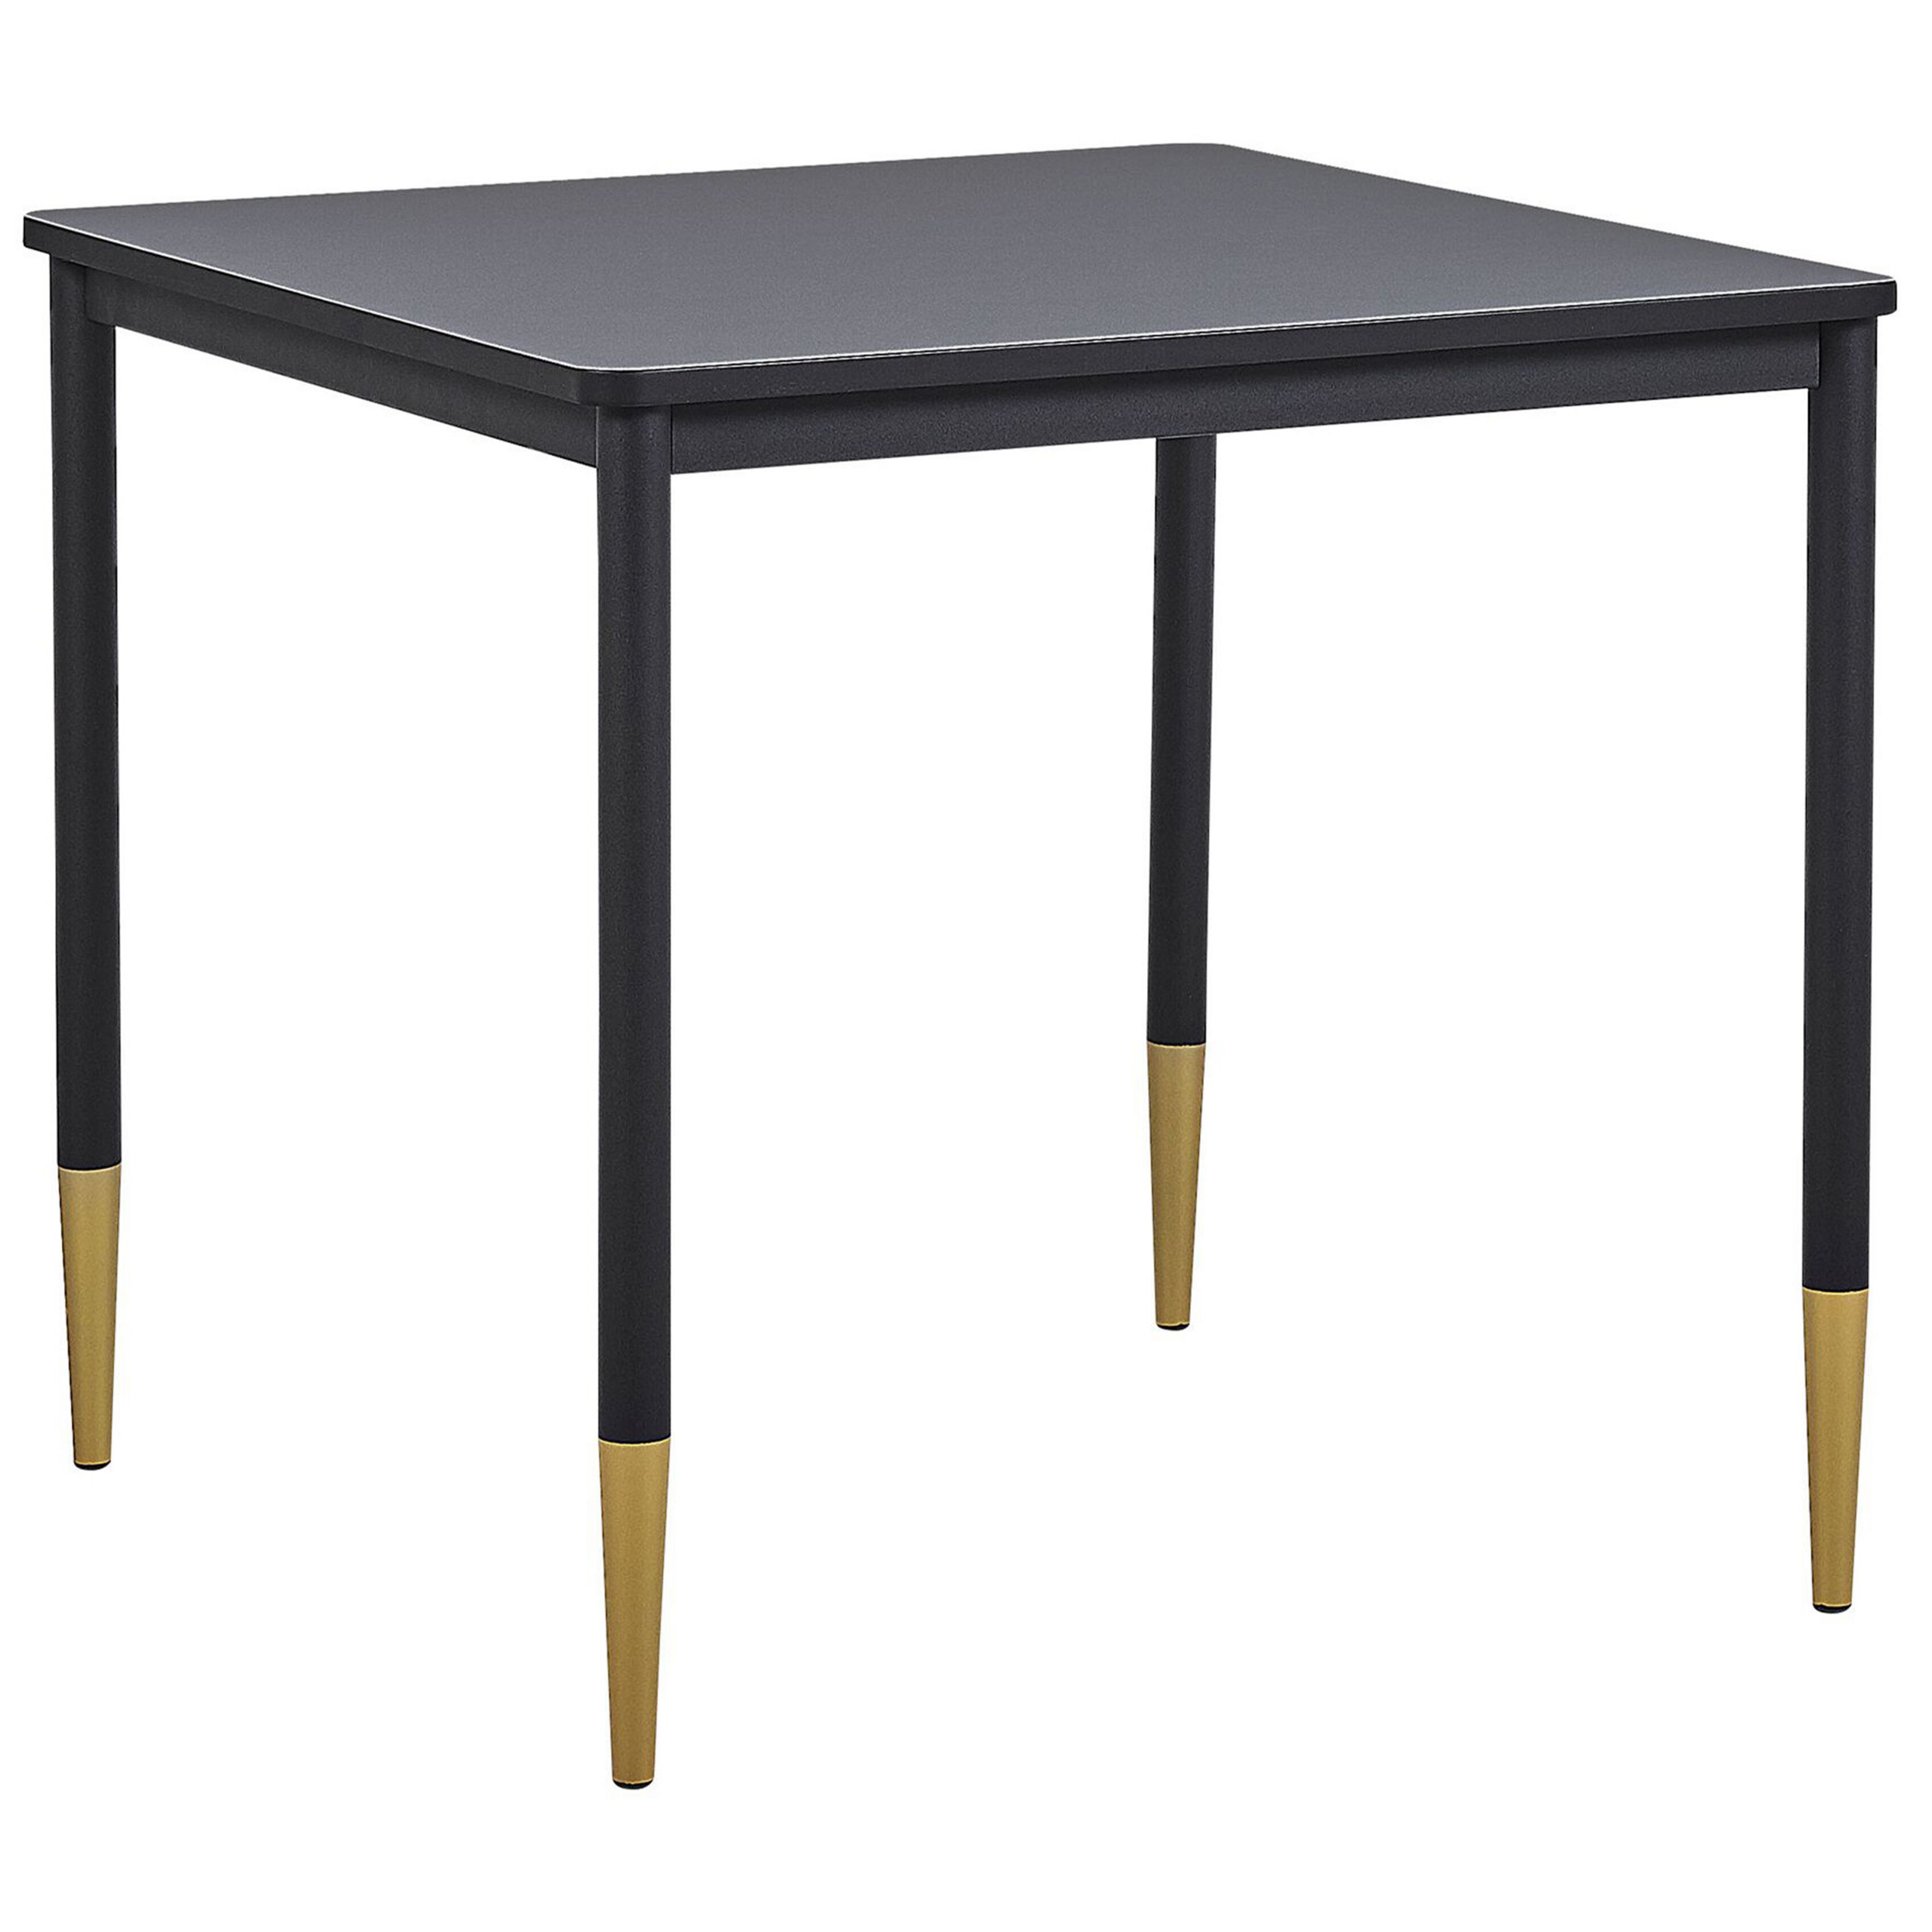 Beliani Dining Table Black MDF Tabletop 80 x 80 cm Square Kitchen Table with Metal Legs Glamour Style